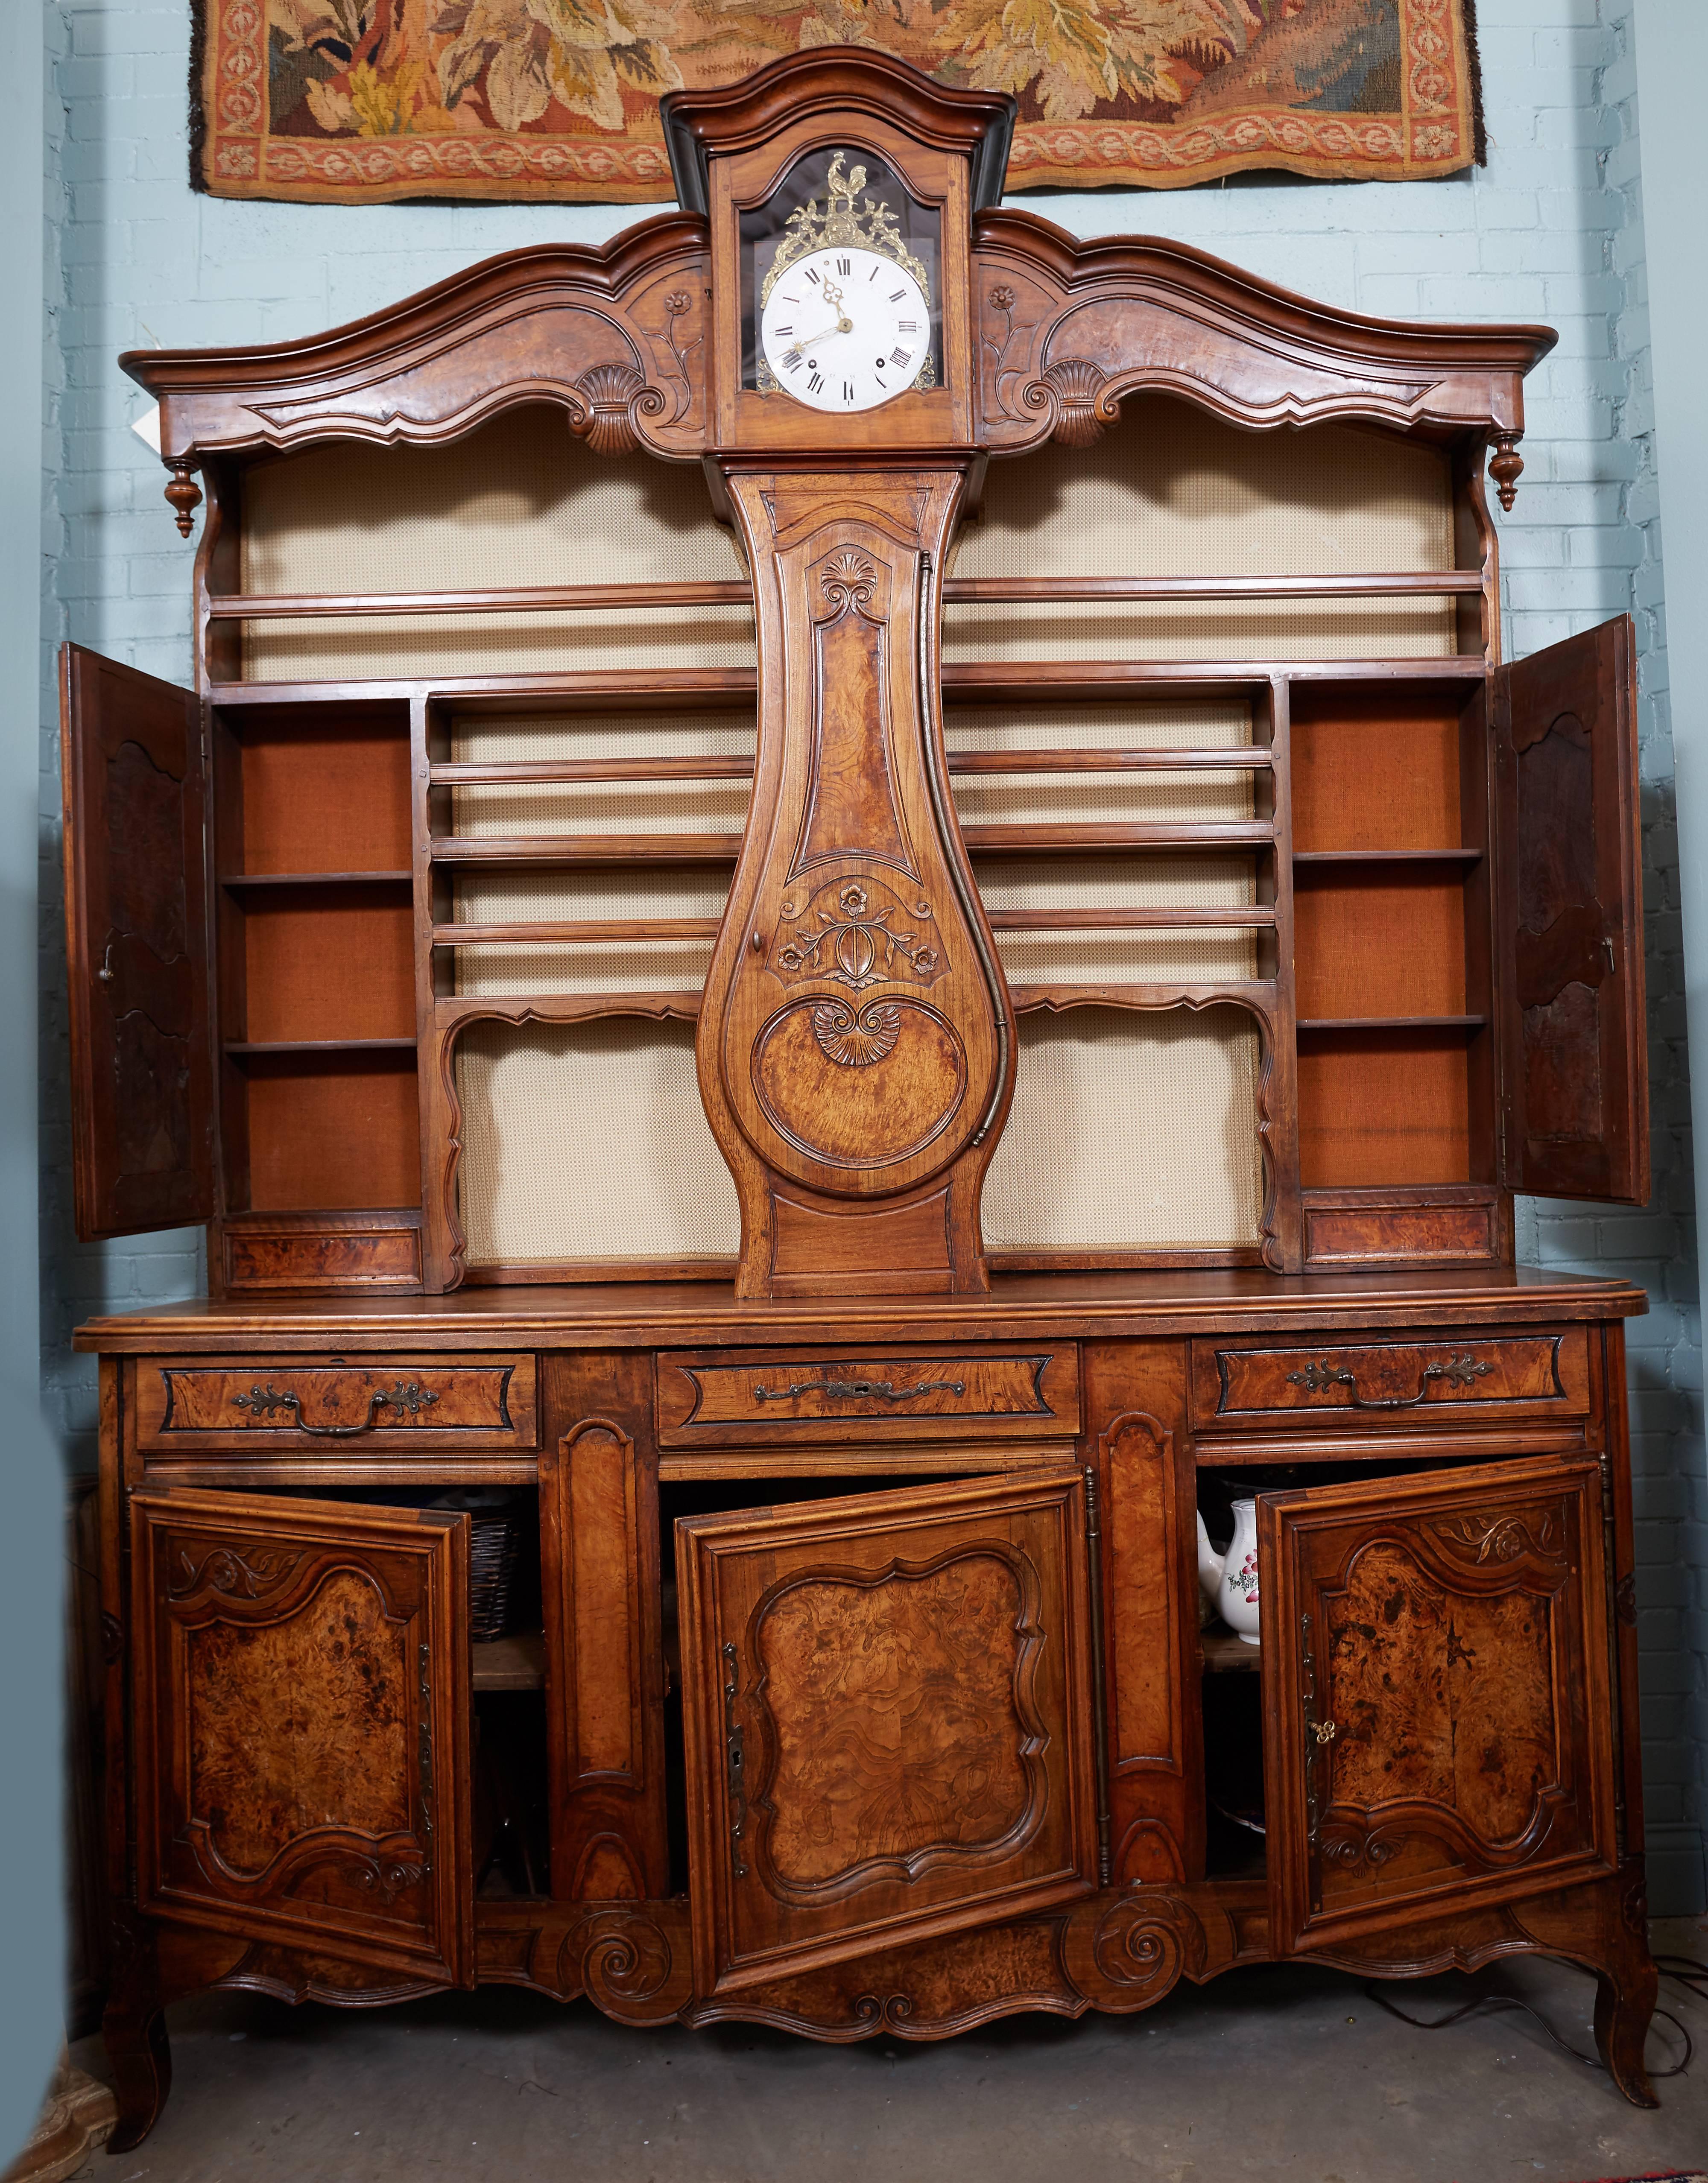 19th century clock vasselier from Lyon. Handsomely carved and patinated walnut. Three working drawers and ample storage compartments. Clock is in good working condition.